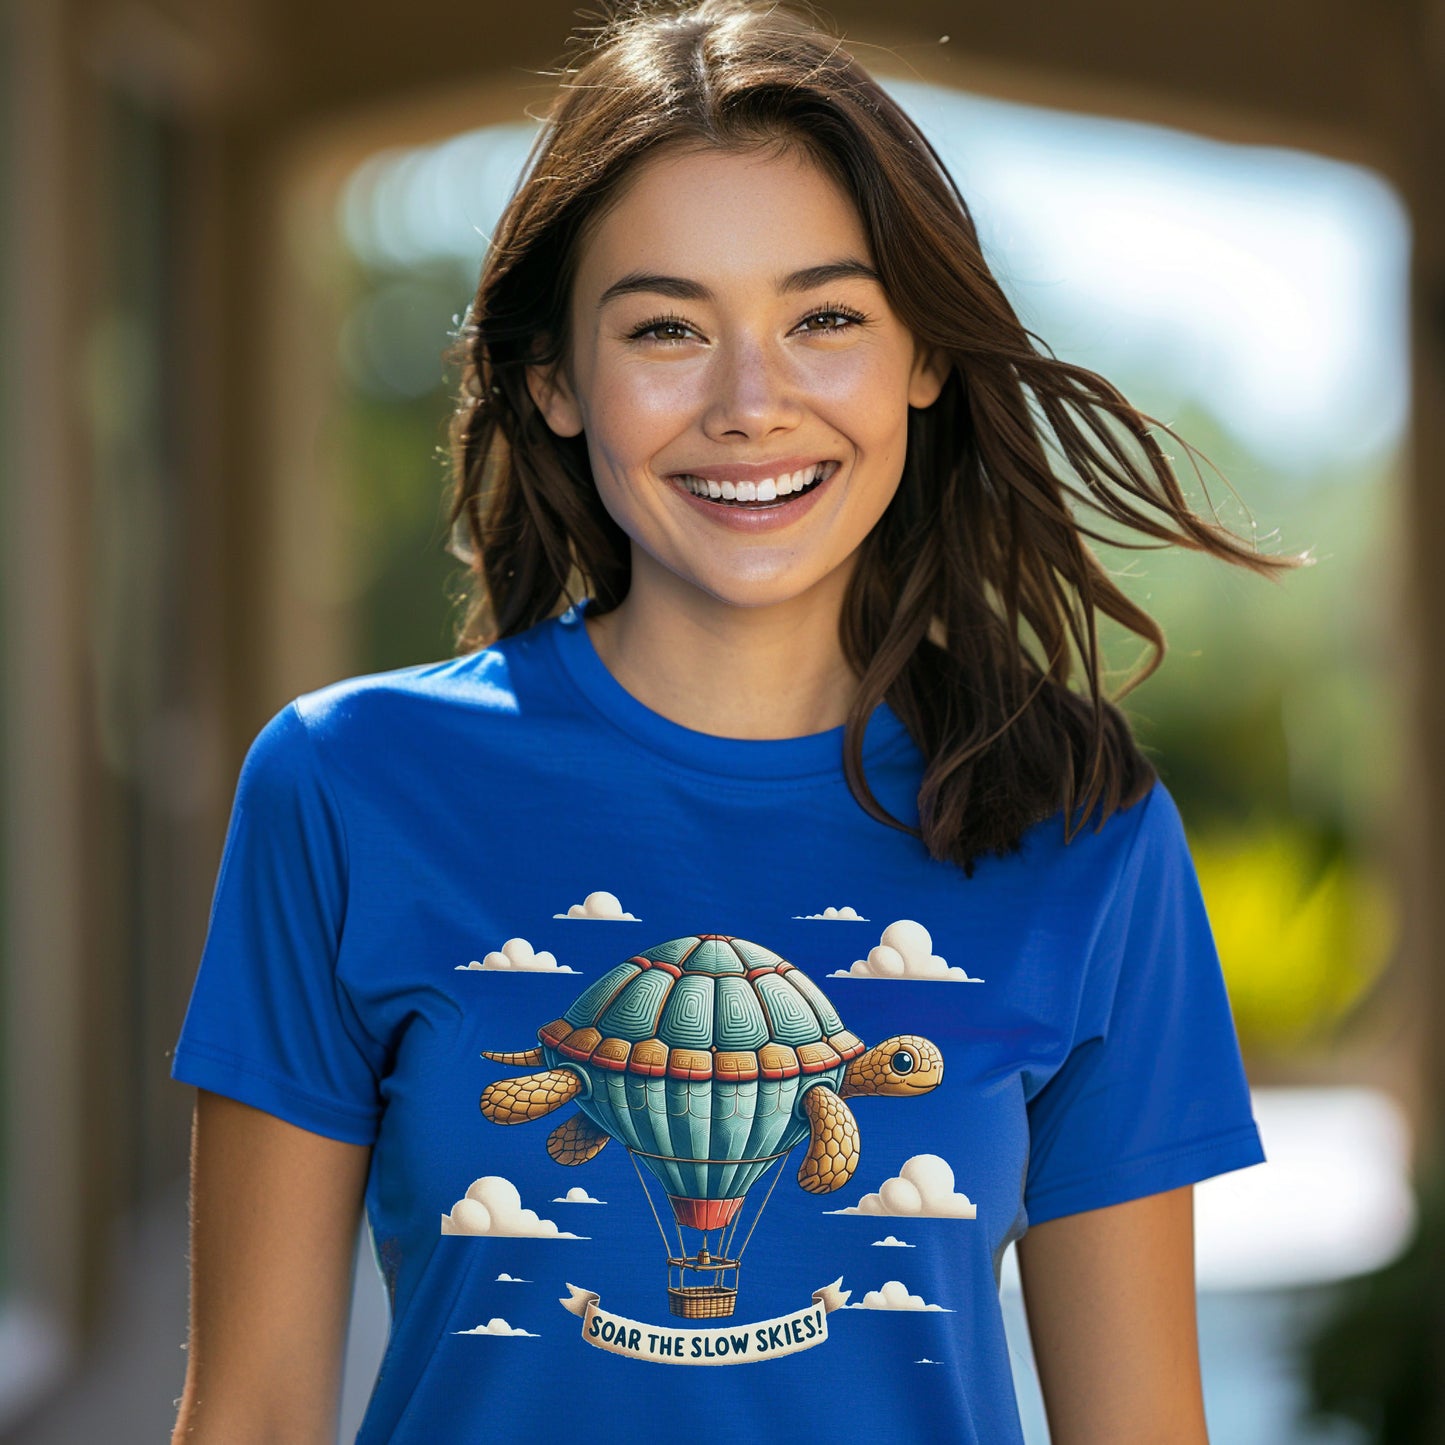 Turtle Hot Air Balloon Tshirt - Get There Slow! Funny Turtle Hot Air Balloon T Shirt, Funny Tshirt Design, Hot Air Balloon TShirt, TShirt